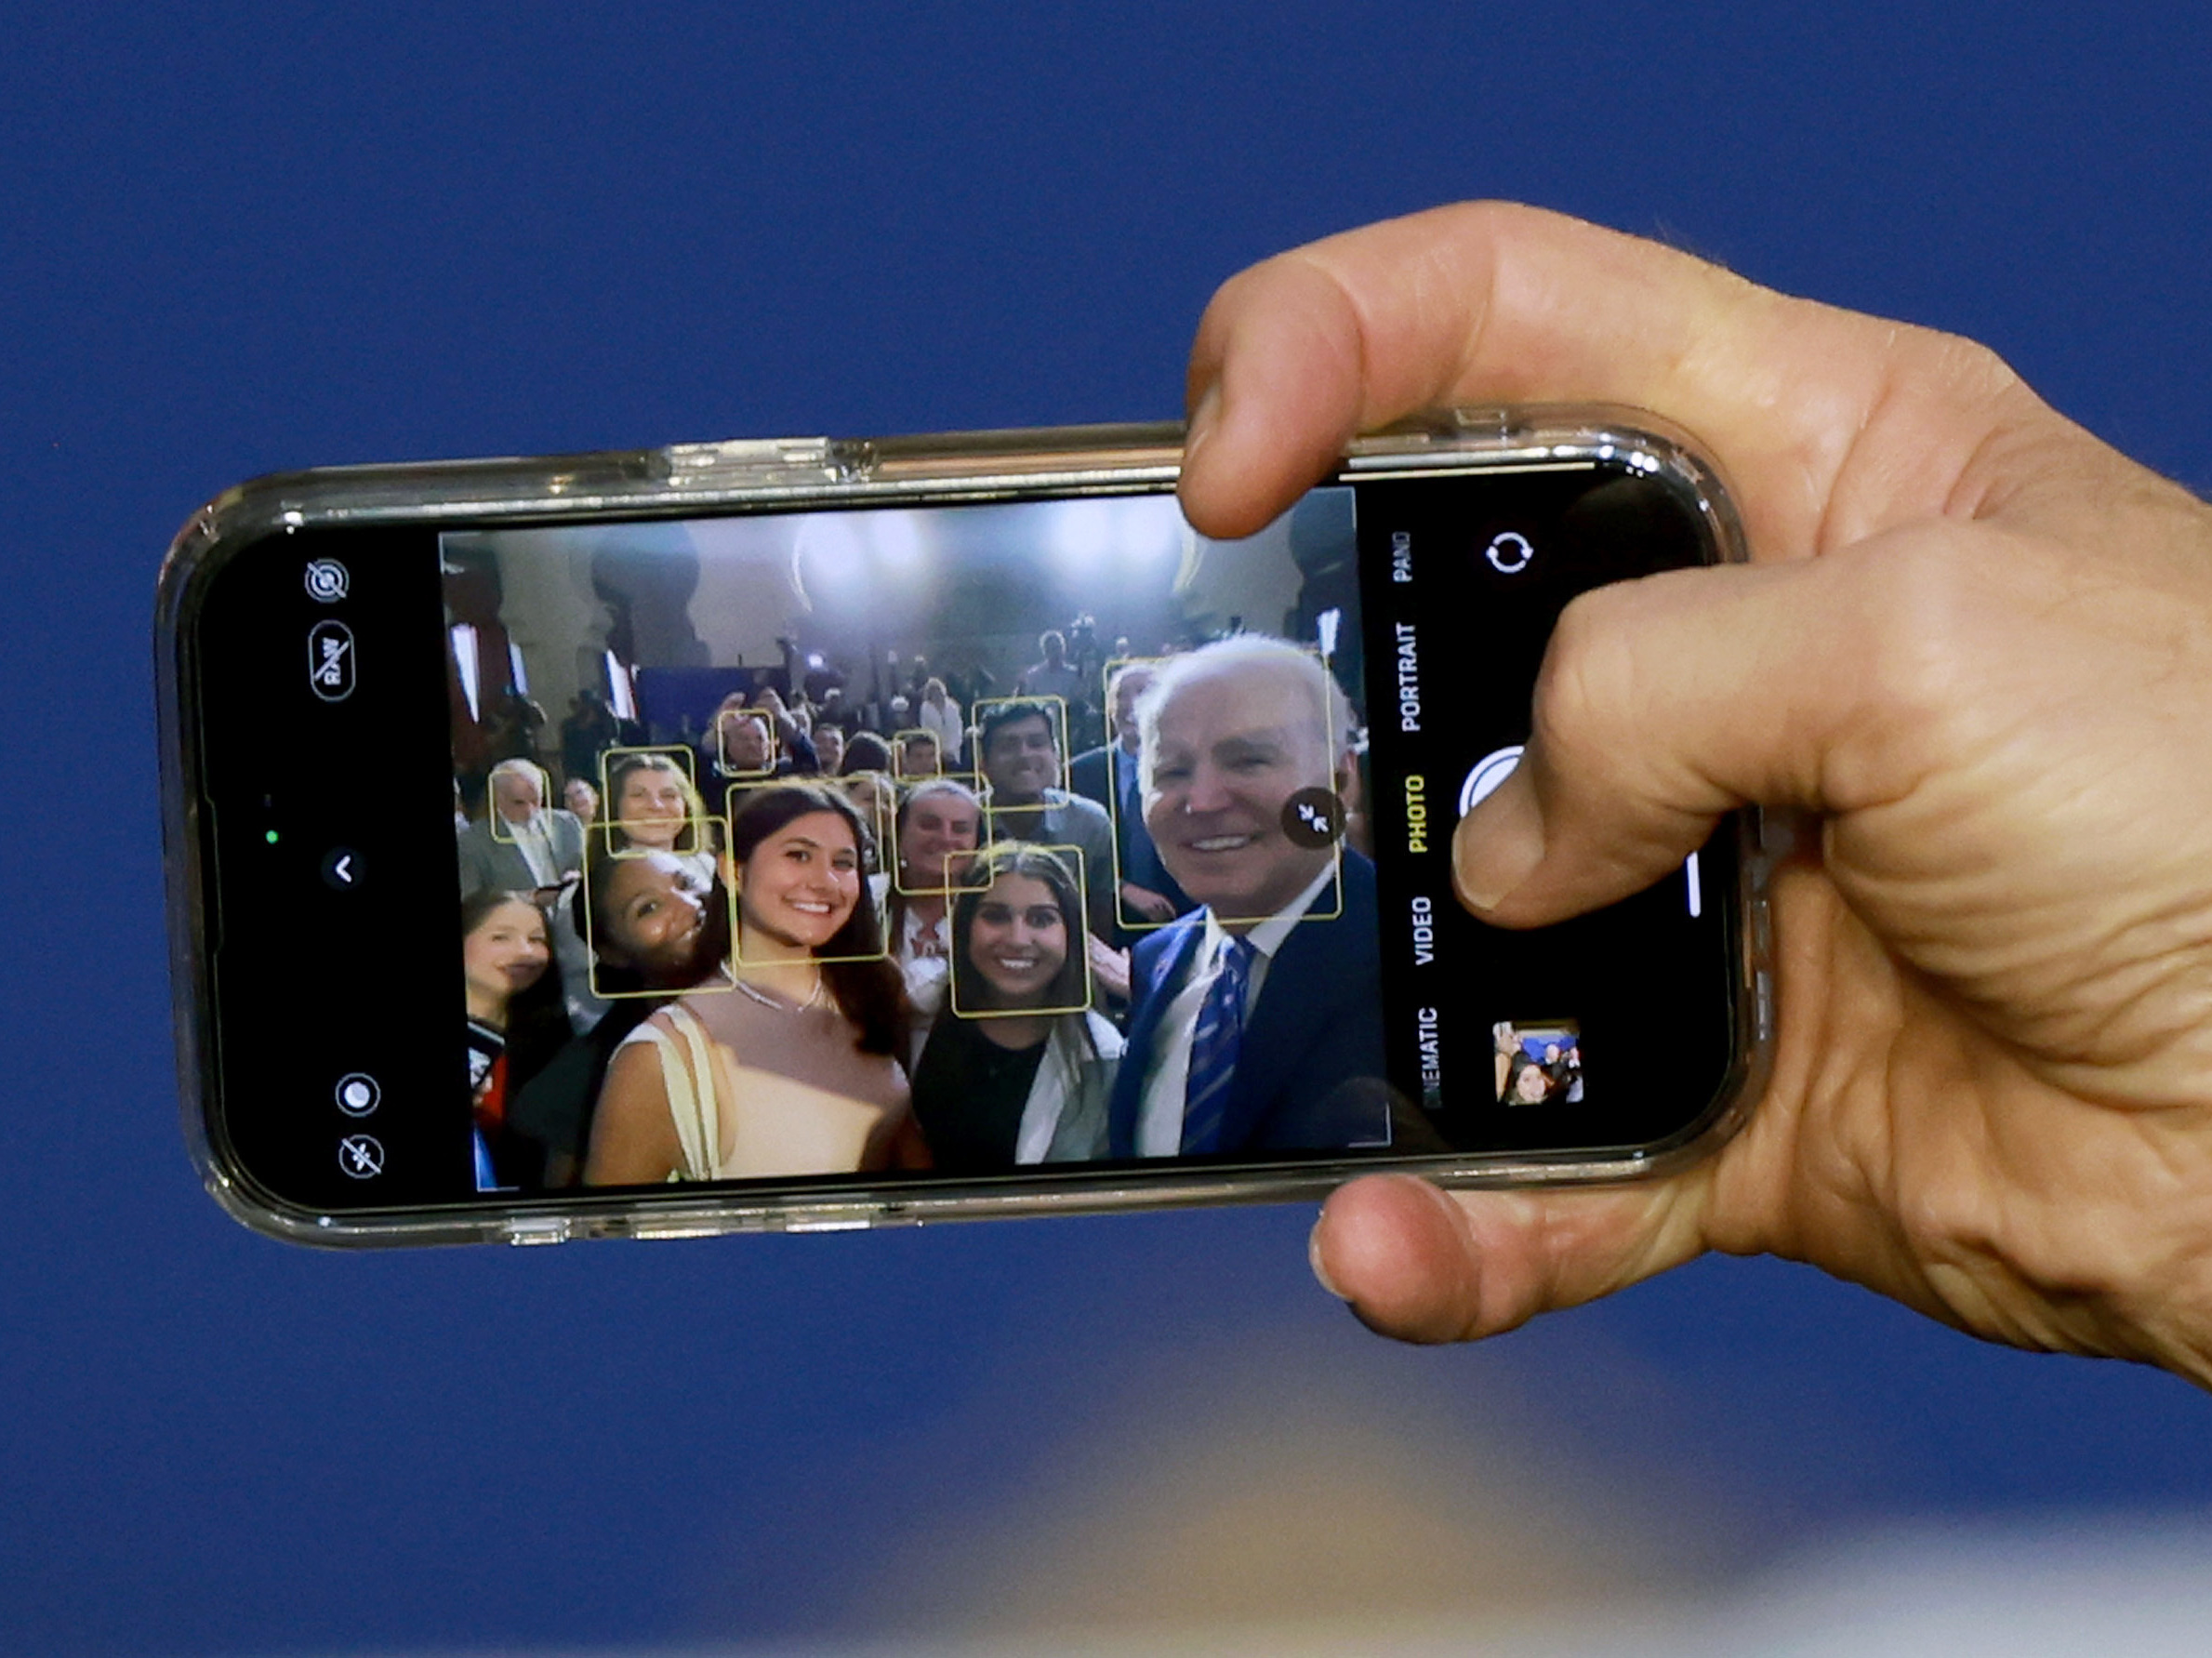 President Biden takes a selfie using a guest's phone during an event at the University of Tampa on Feb. 9, 2023.